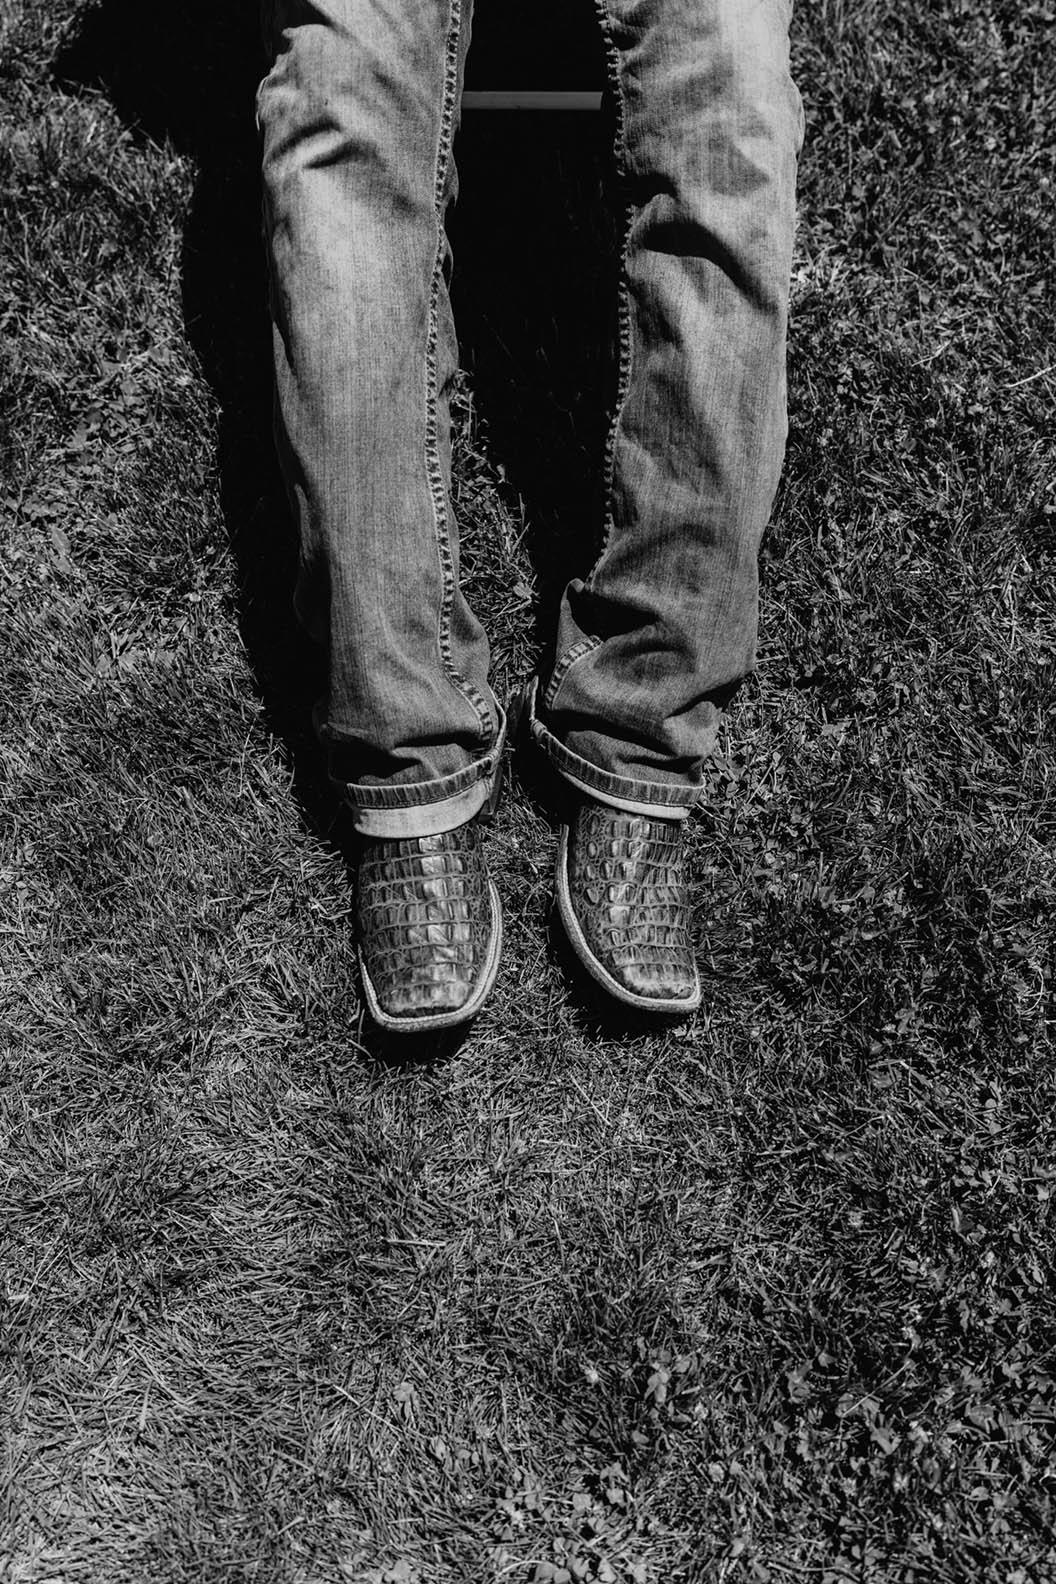 Black and white image of legs wearing jeans and cowboy boots against grass/dirt